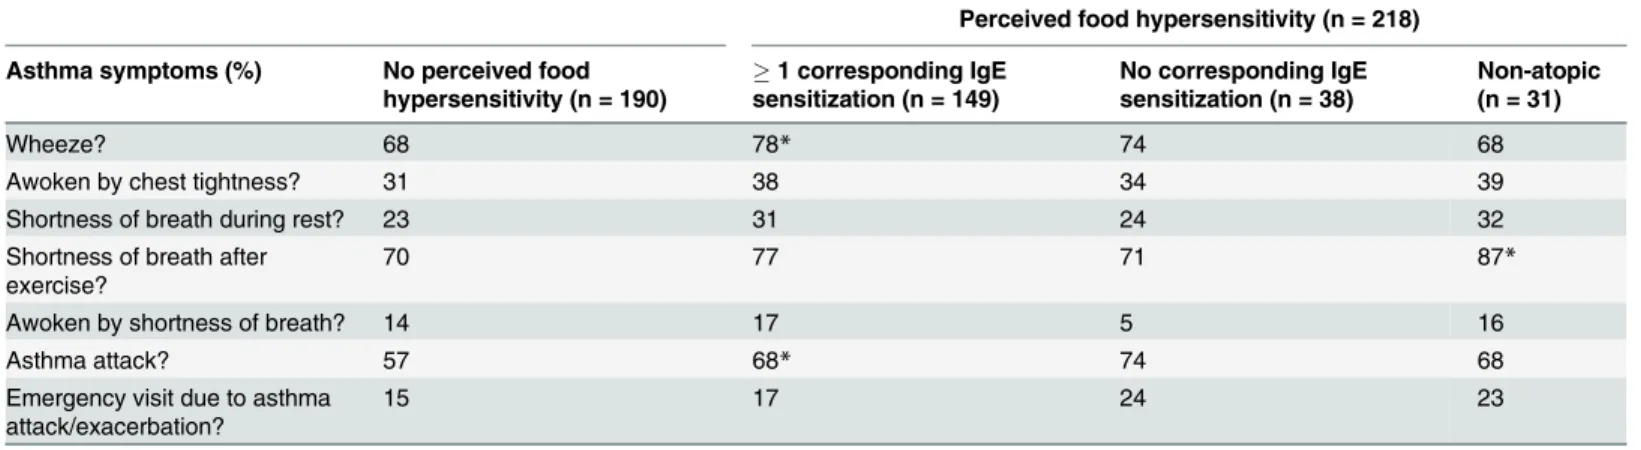 Table 5. Asthmatics with and without perceived food hypersensitivity, divided by IgE sensitization status.